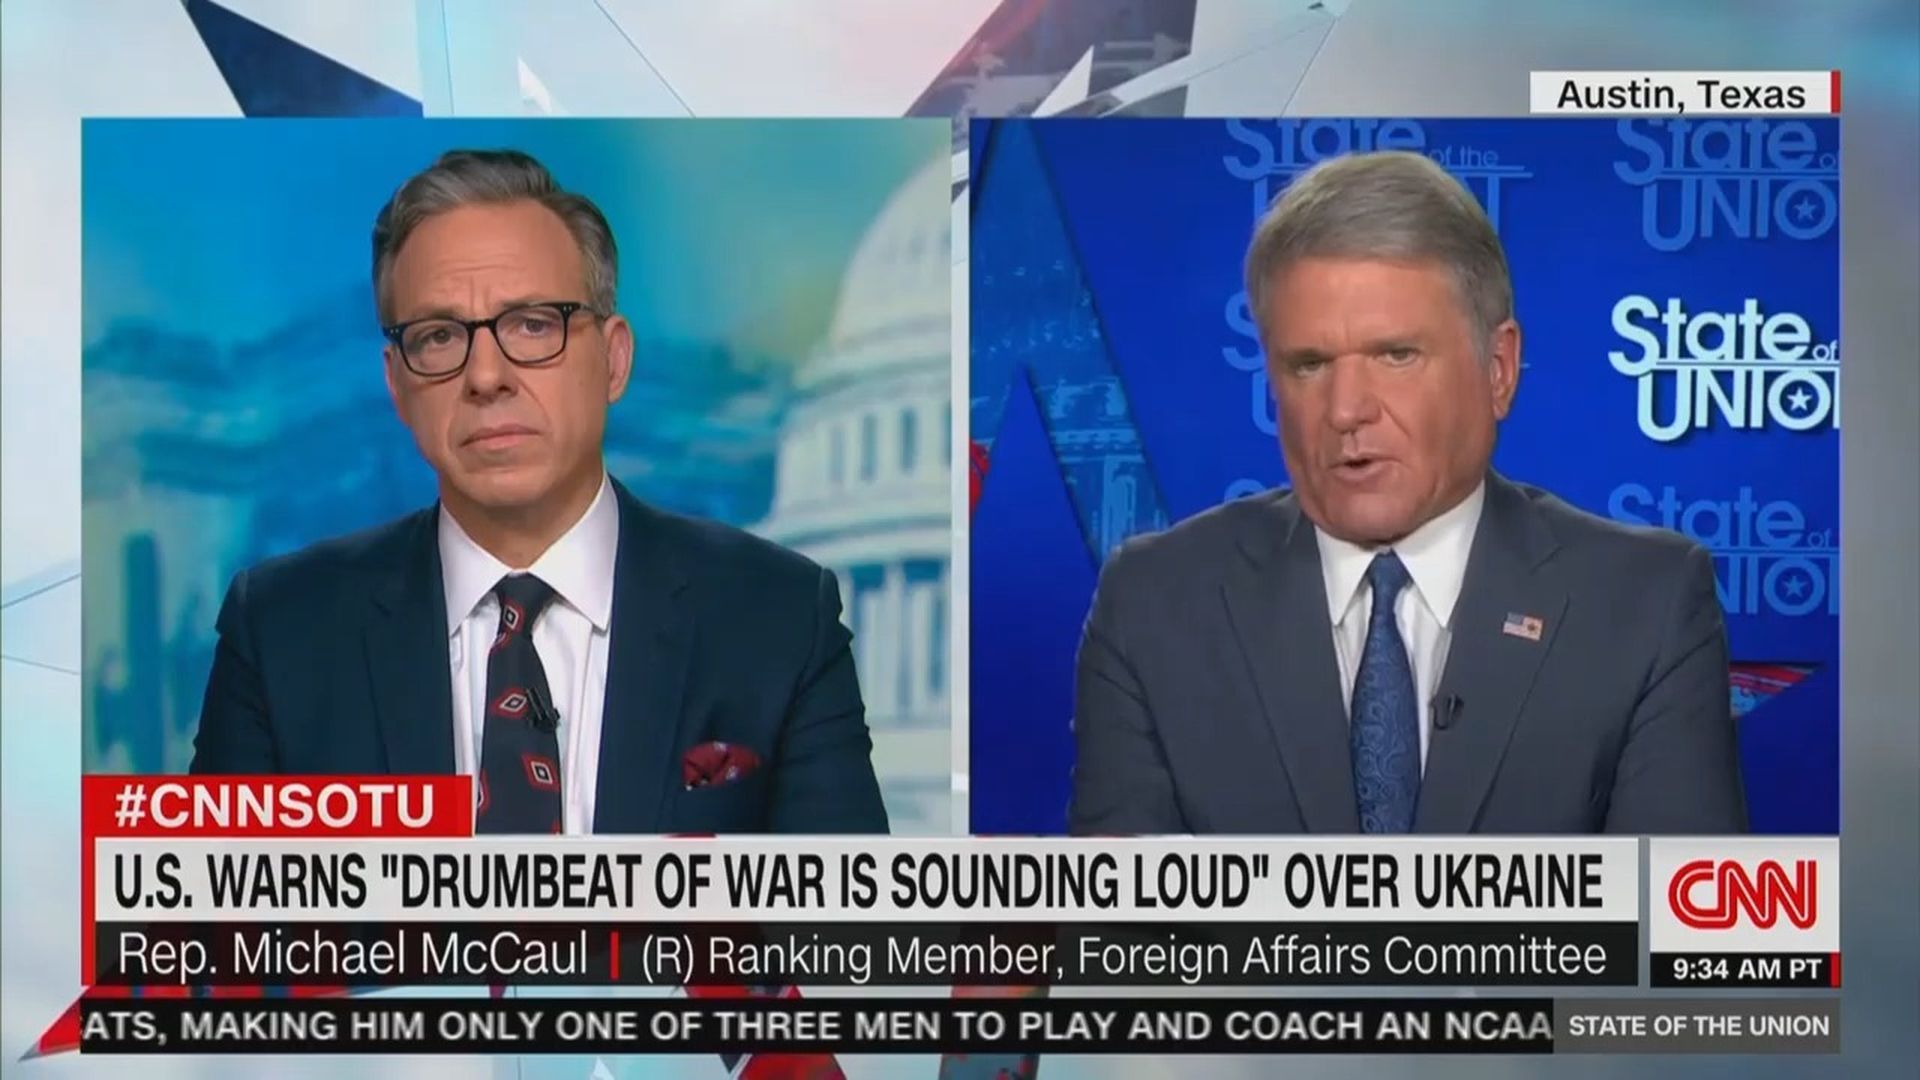 Rep. Michael McCaul is seen speaking with Jake Tapper on CNN's "State of the Union."